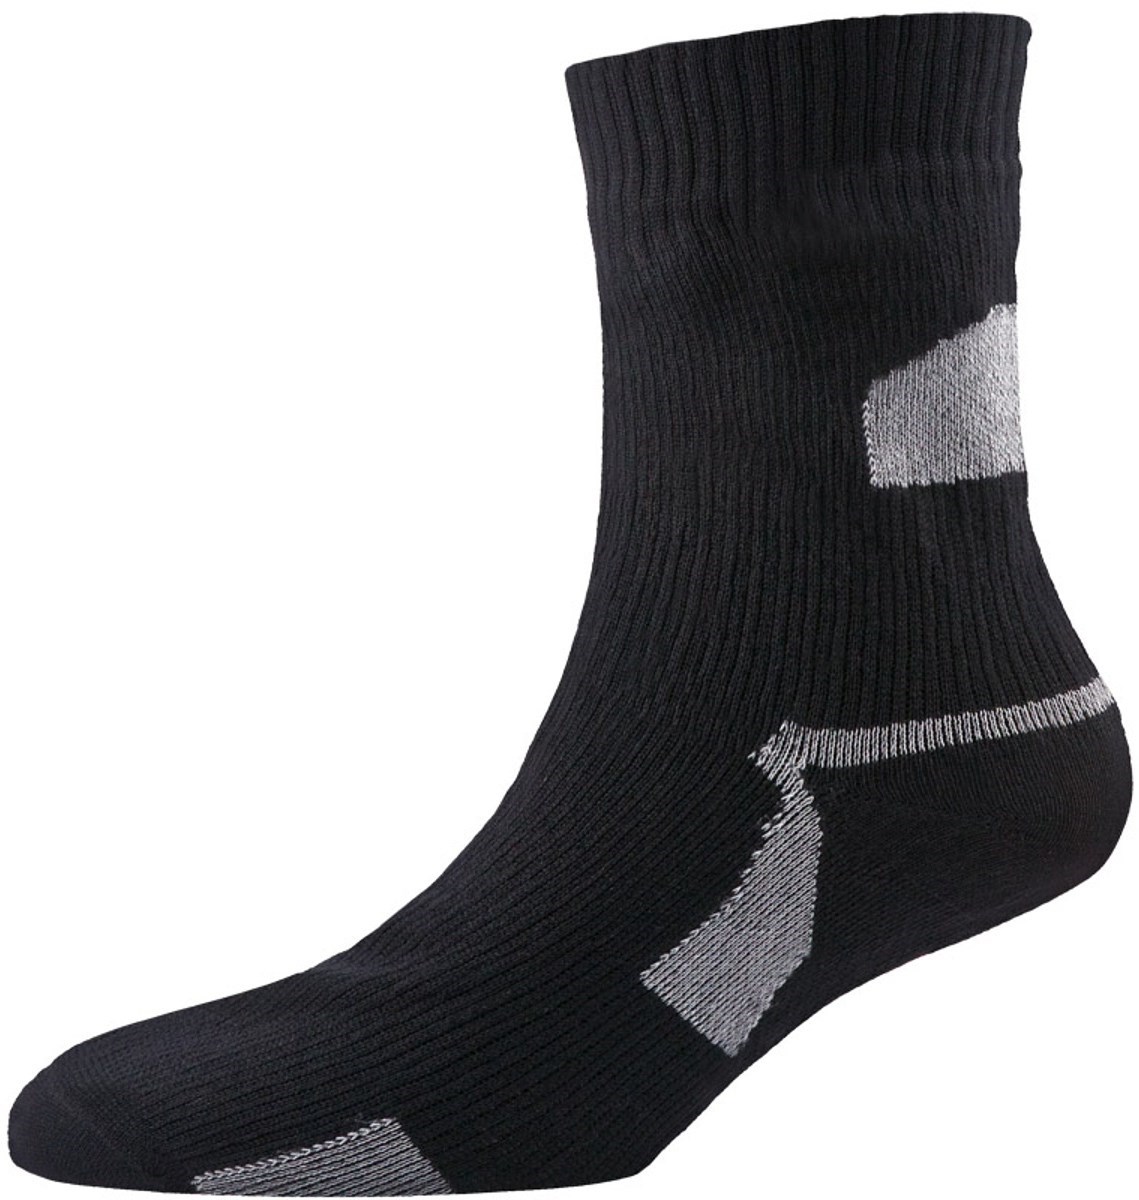 Sealskinz Waterproof Thin Ankle Length Sock product image